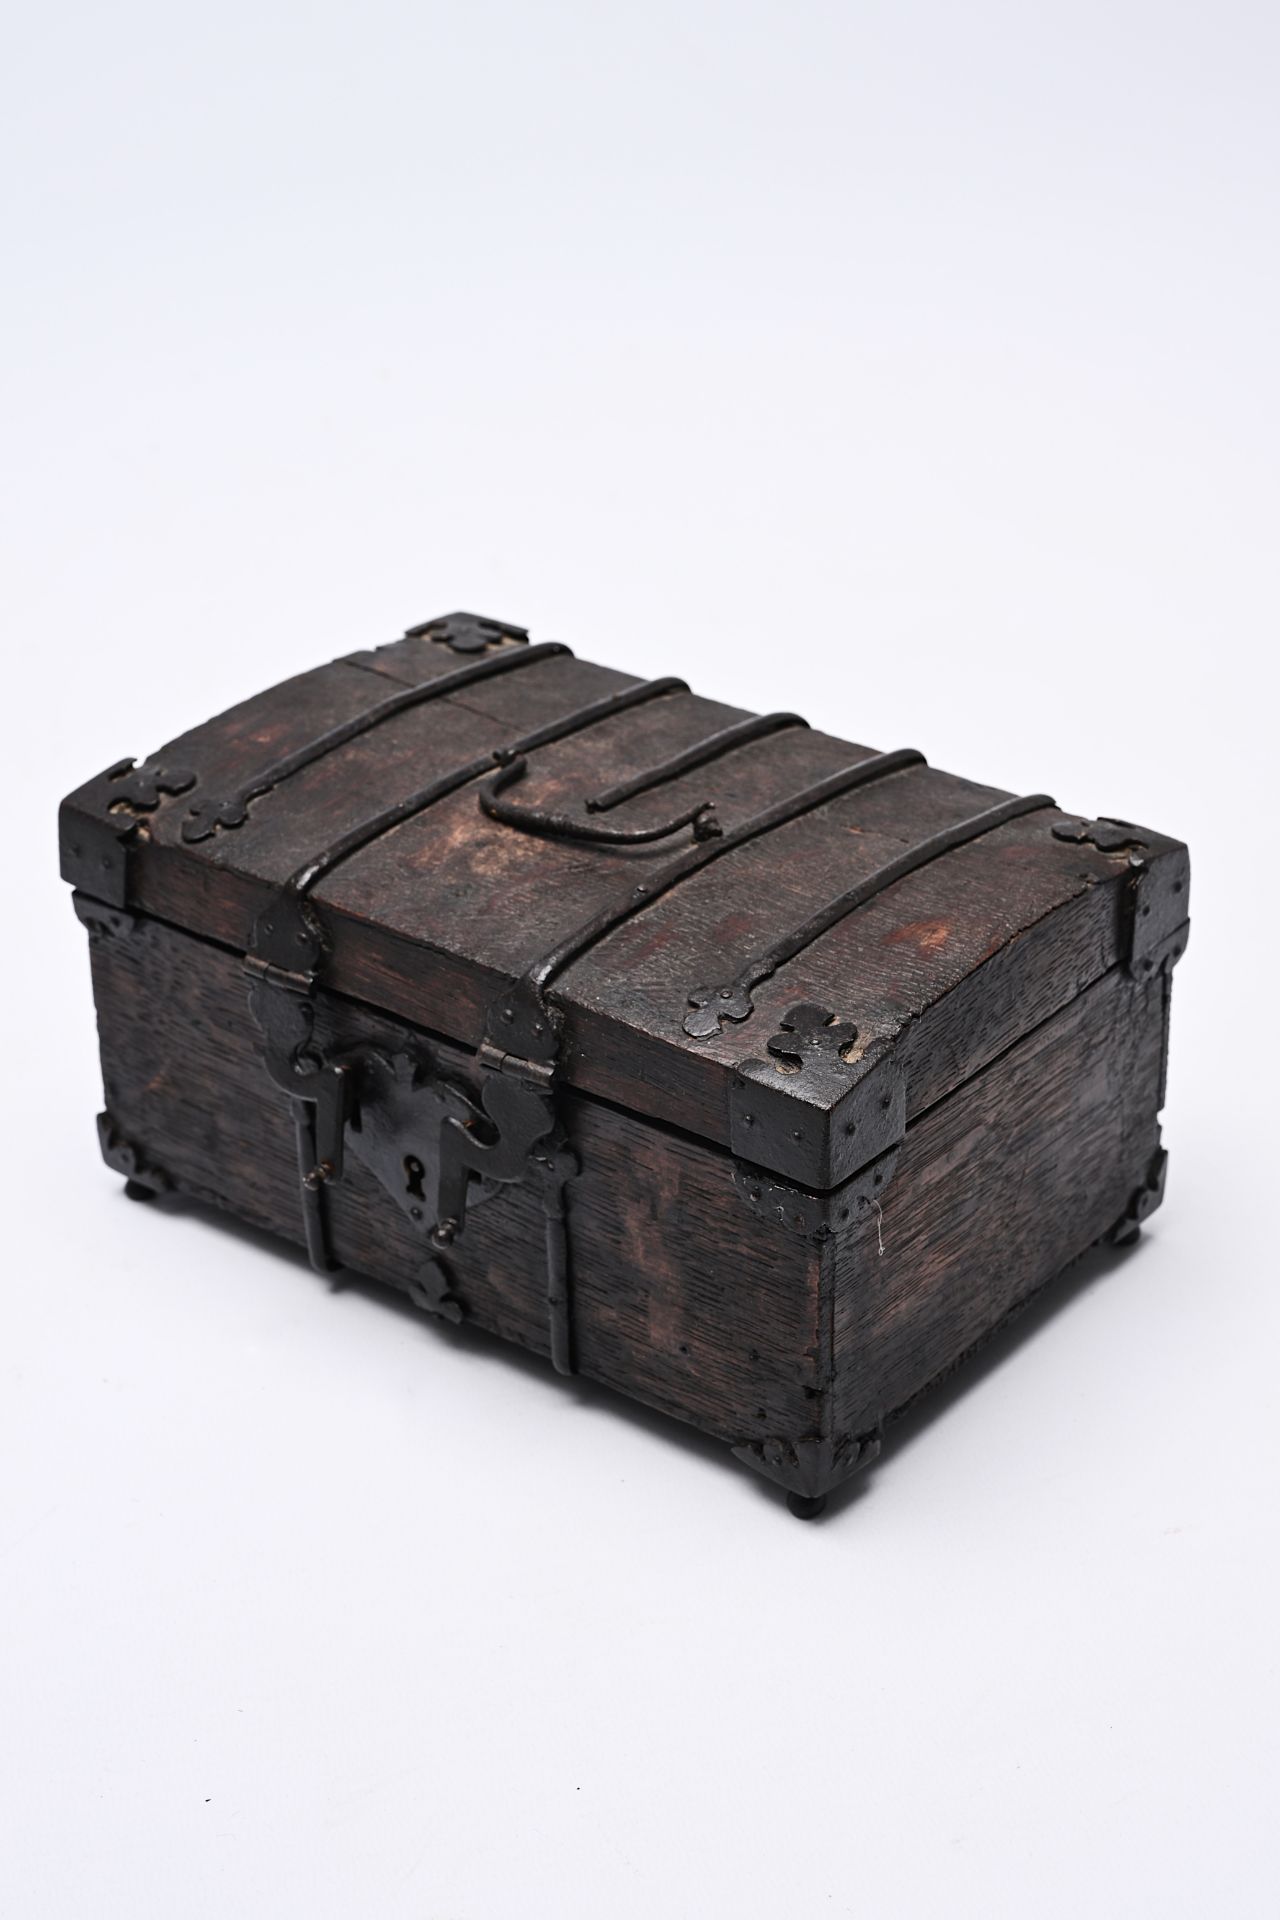 A wooden chest with iron mounts, Western Europe, 16th C. - Image 11 of 11